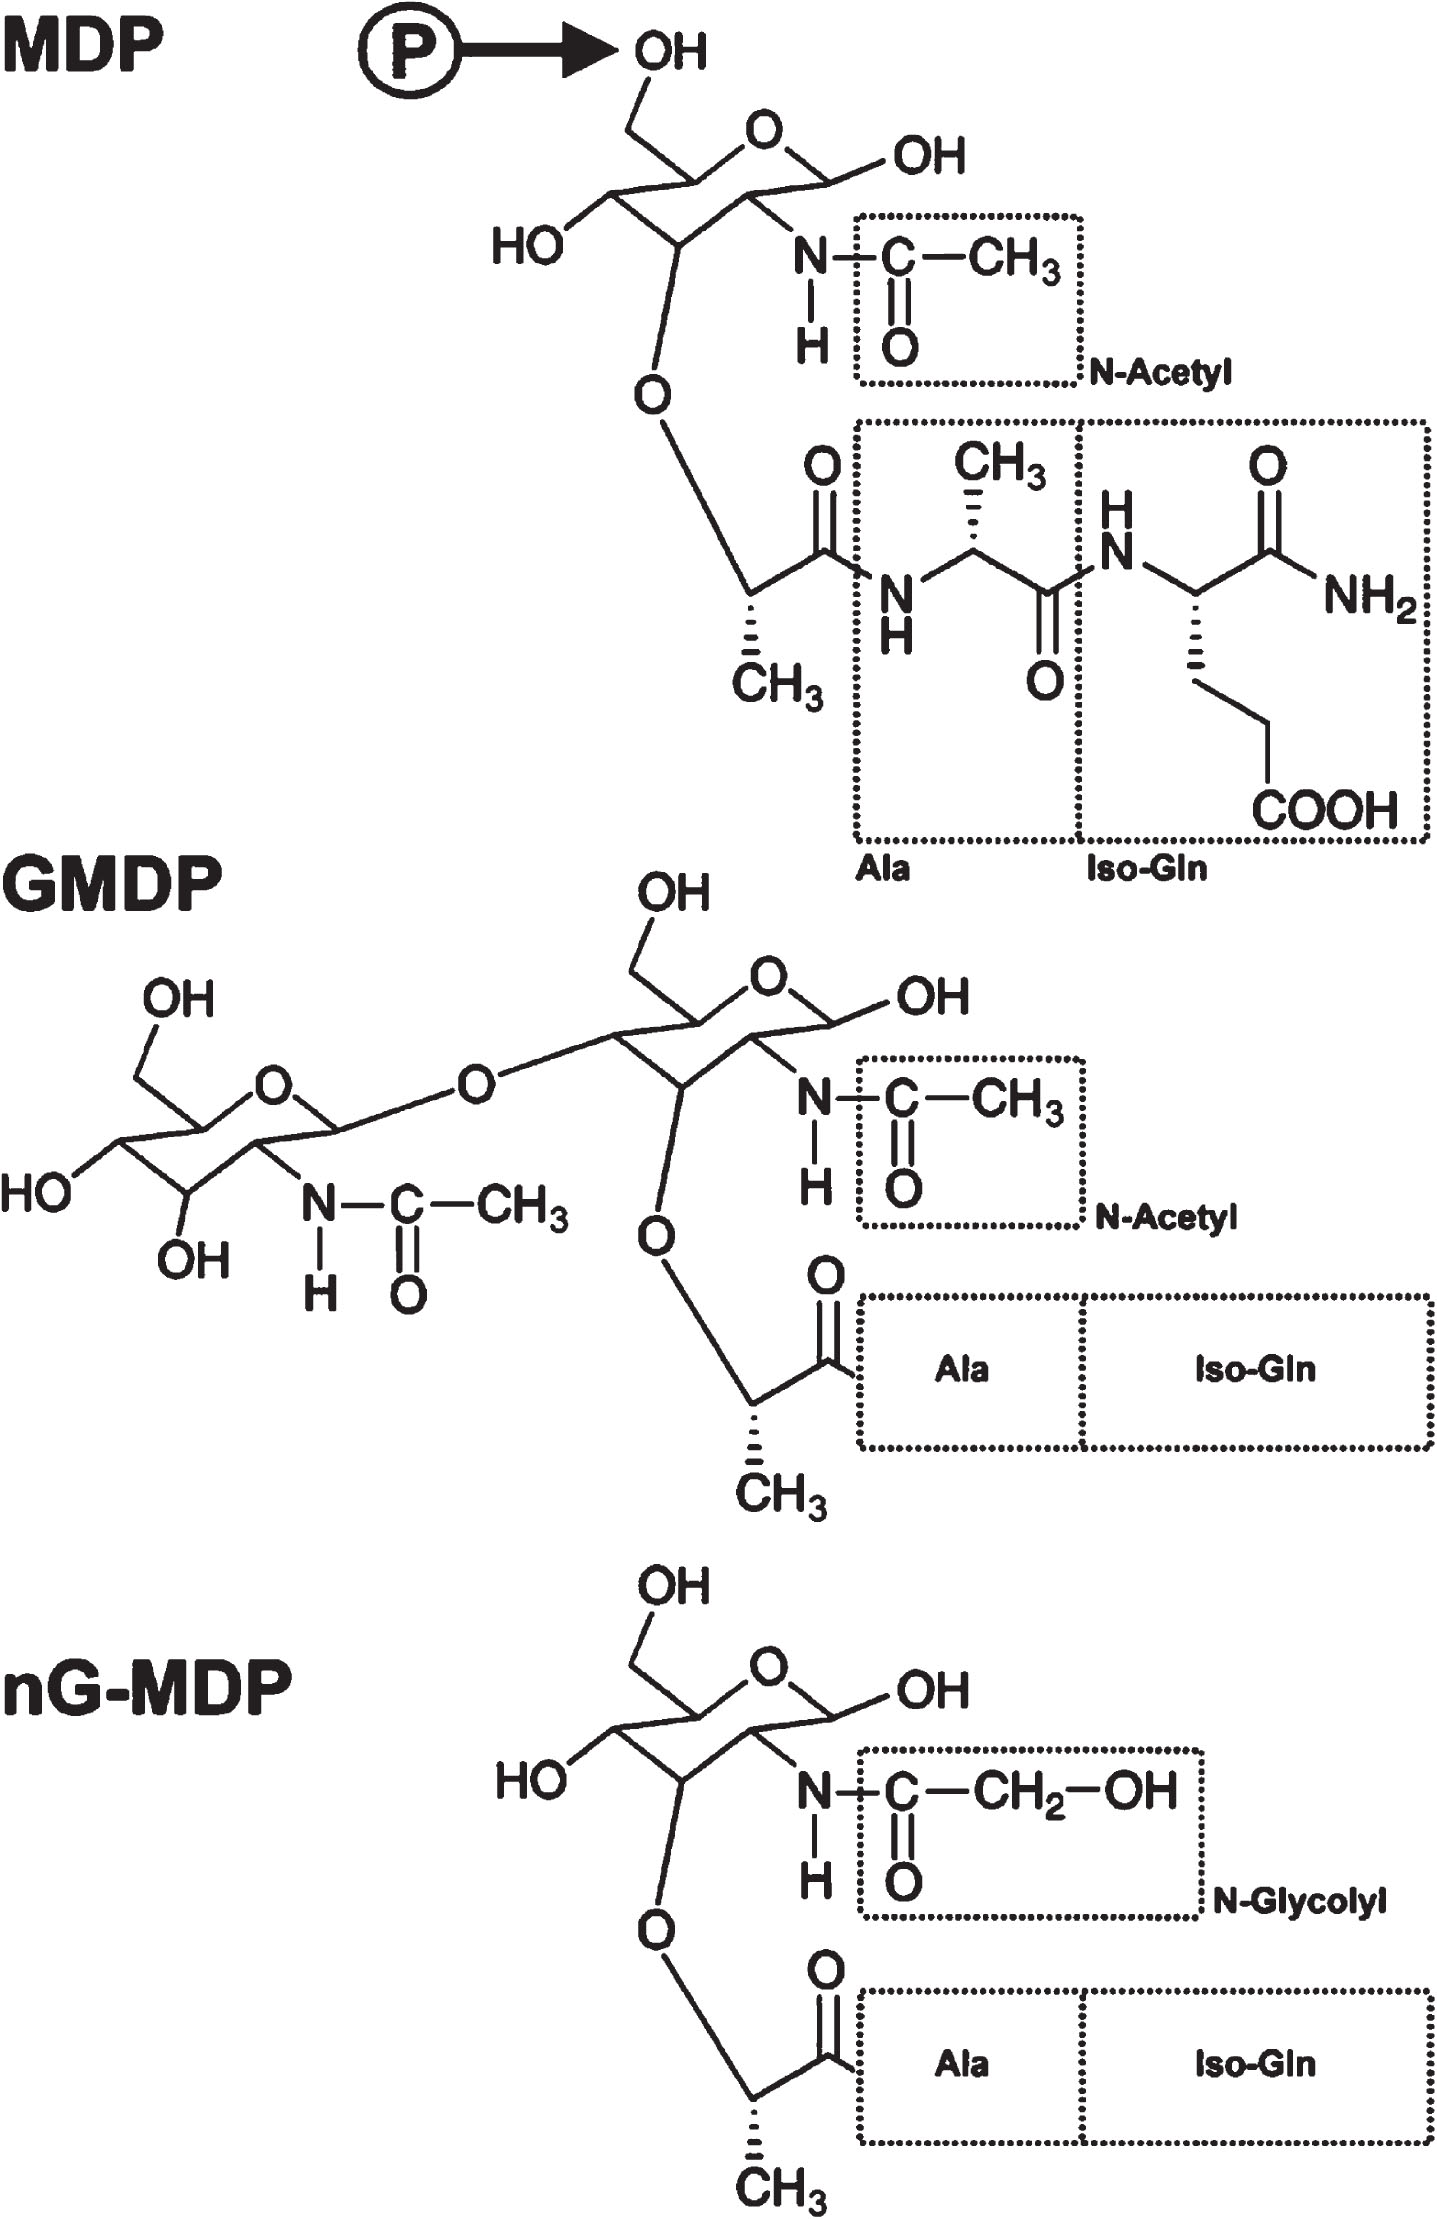 Structures of MDP (N-acetylmuramyl-L-alanyl-D-isoglutamine), GMDP (N-acetylglucosaminyl-MDP, and nG-MDP (N-glycolyl-MDP) based on muramic acid (carboxyethyl-D-glucosamine). Figure modified from [113]. The site in MDP for phosphorylation (P) by NAGK [125] is indicated by an arrow.